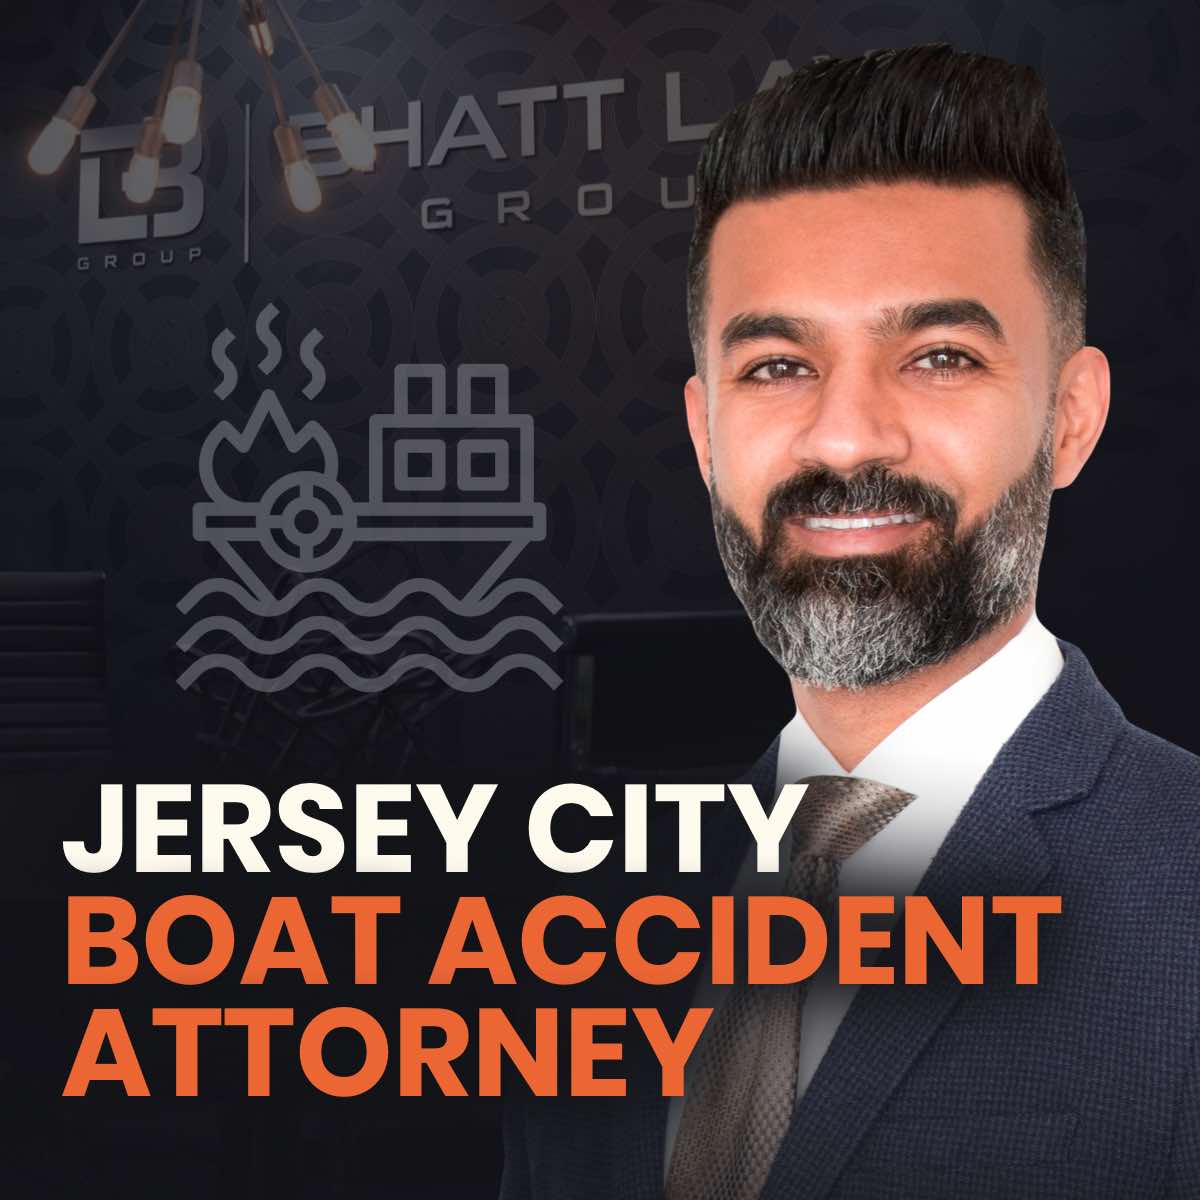 Jersey City Boat Accident Attorney